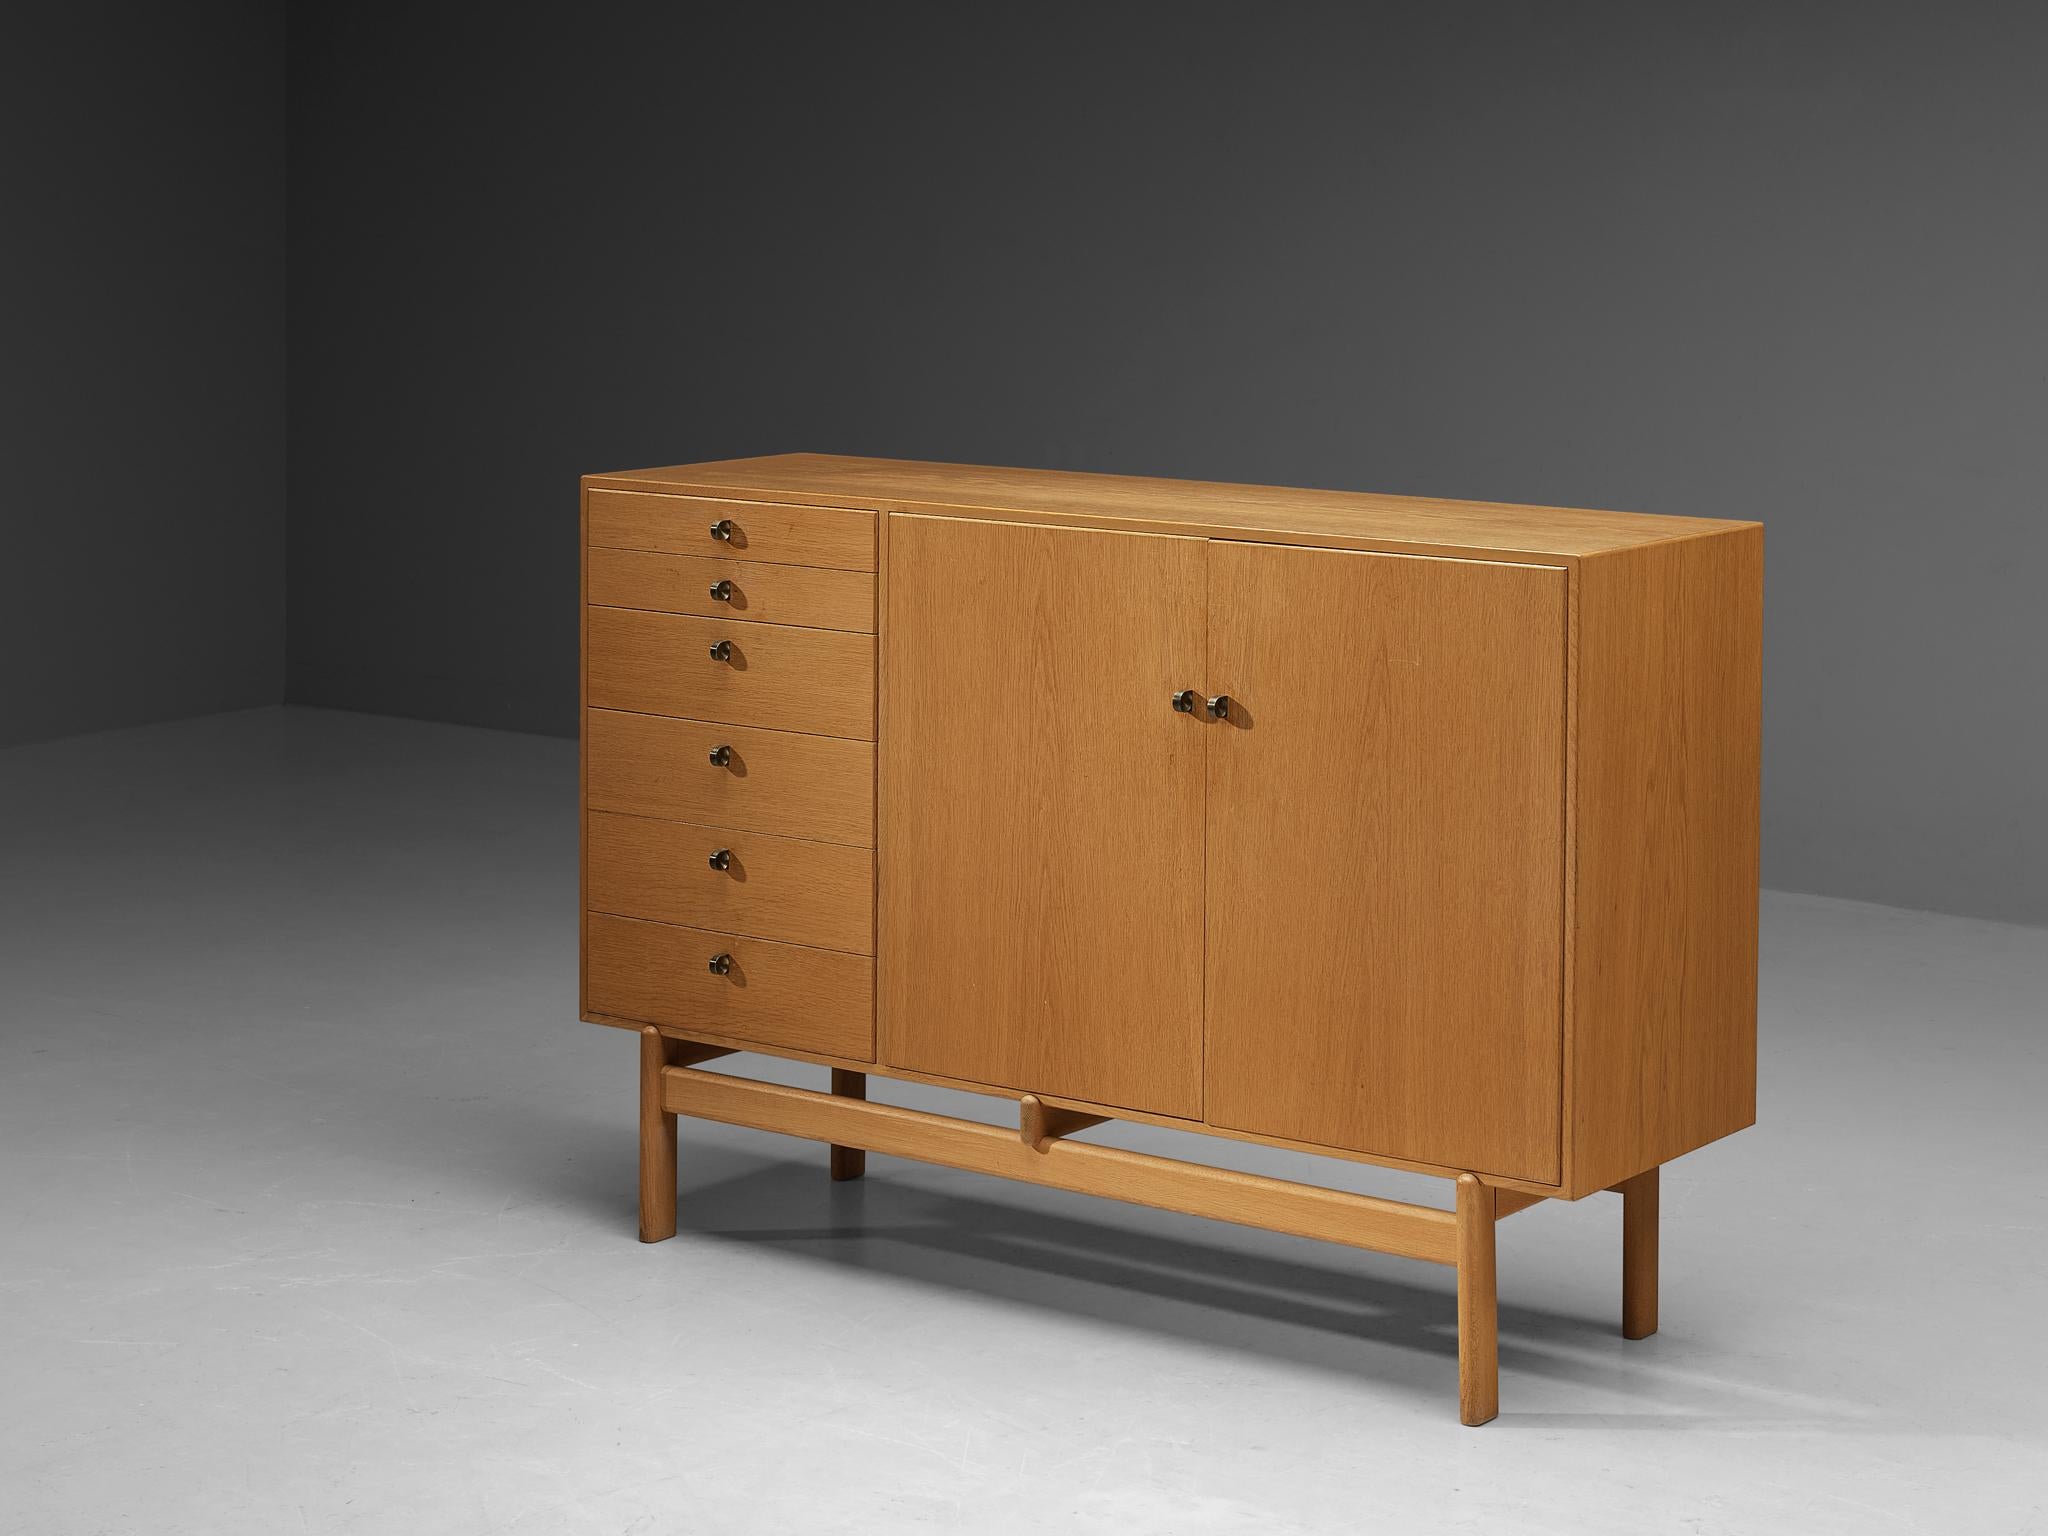 Tove and Edvard Kindt-Larsen for Seffle Möbelfabrik, cabinet with drawers, oak, brass, Denmark, design 1961

Danish designer couple Tove and Edvard Kindt-Larsen designed this cabinet with drawers in 1961. It has a well-structured front with a column